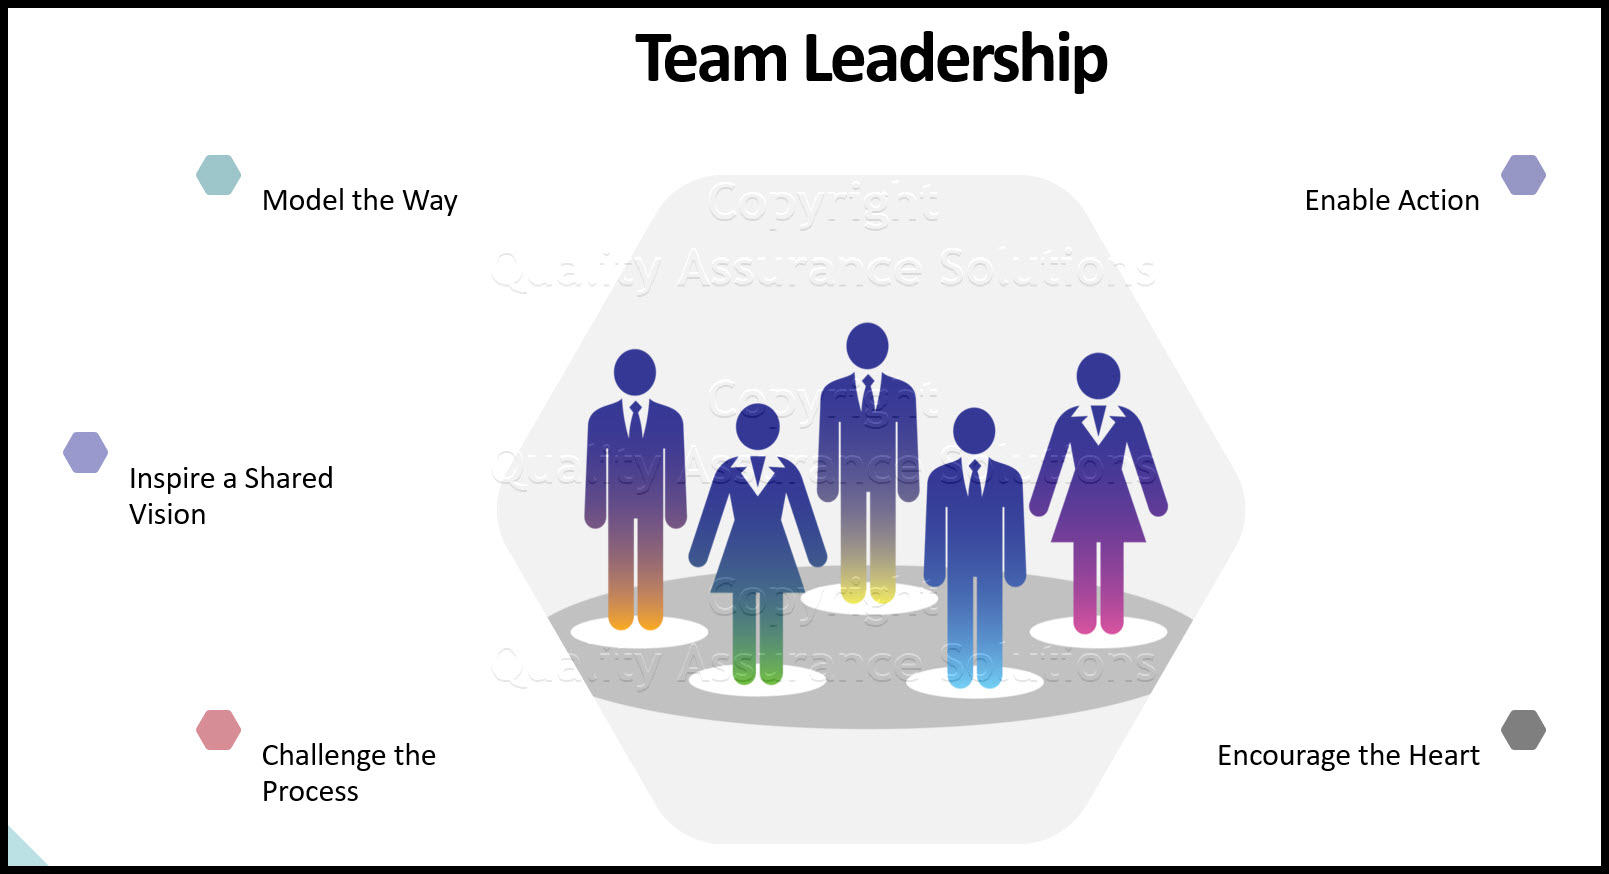 Use these effective team communication skills to build a performance based team.